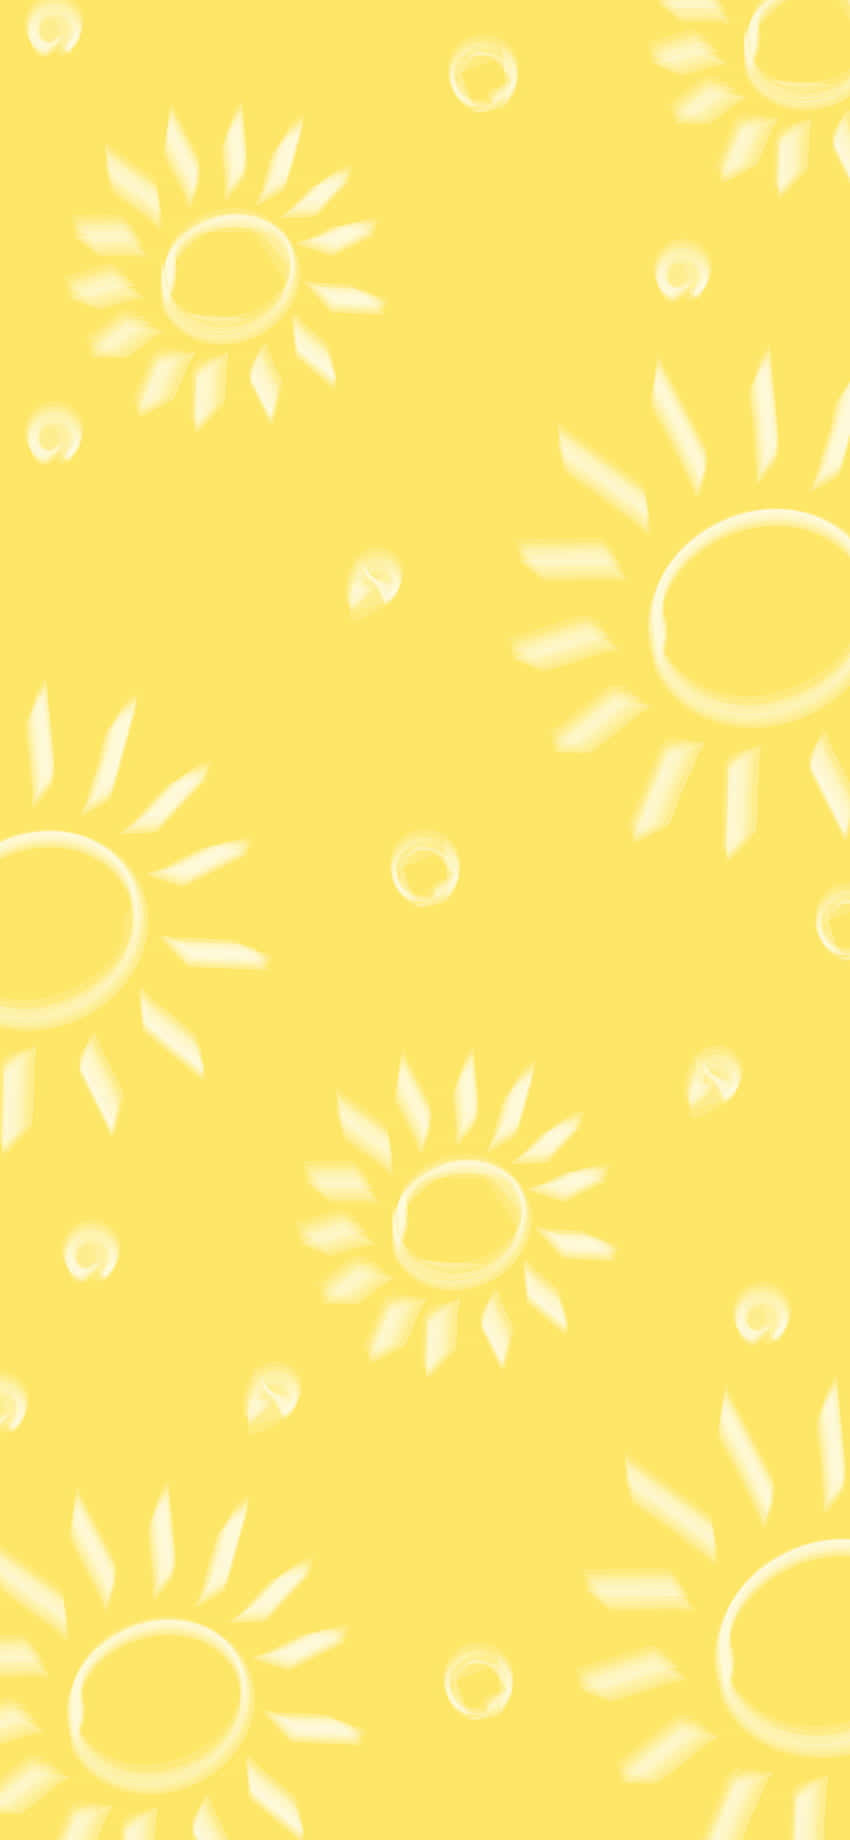 Brighten Your Day With This Cute Sun! Background